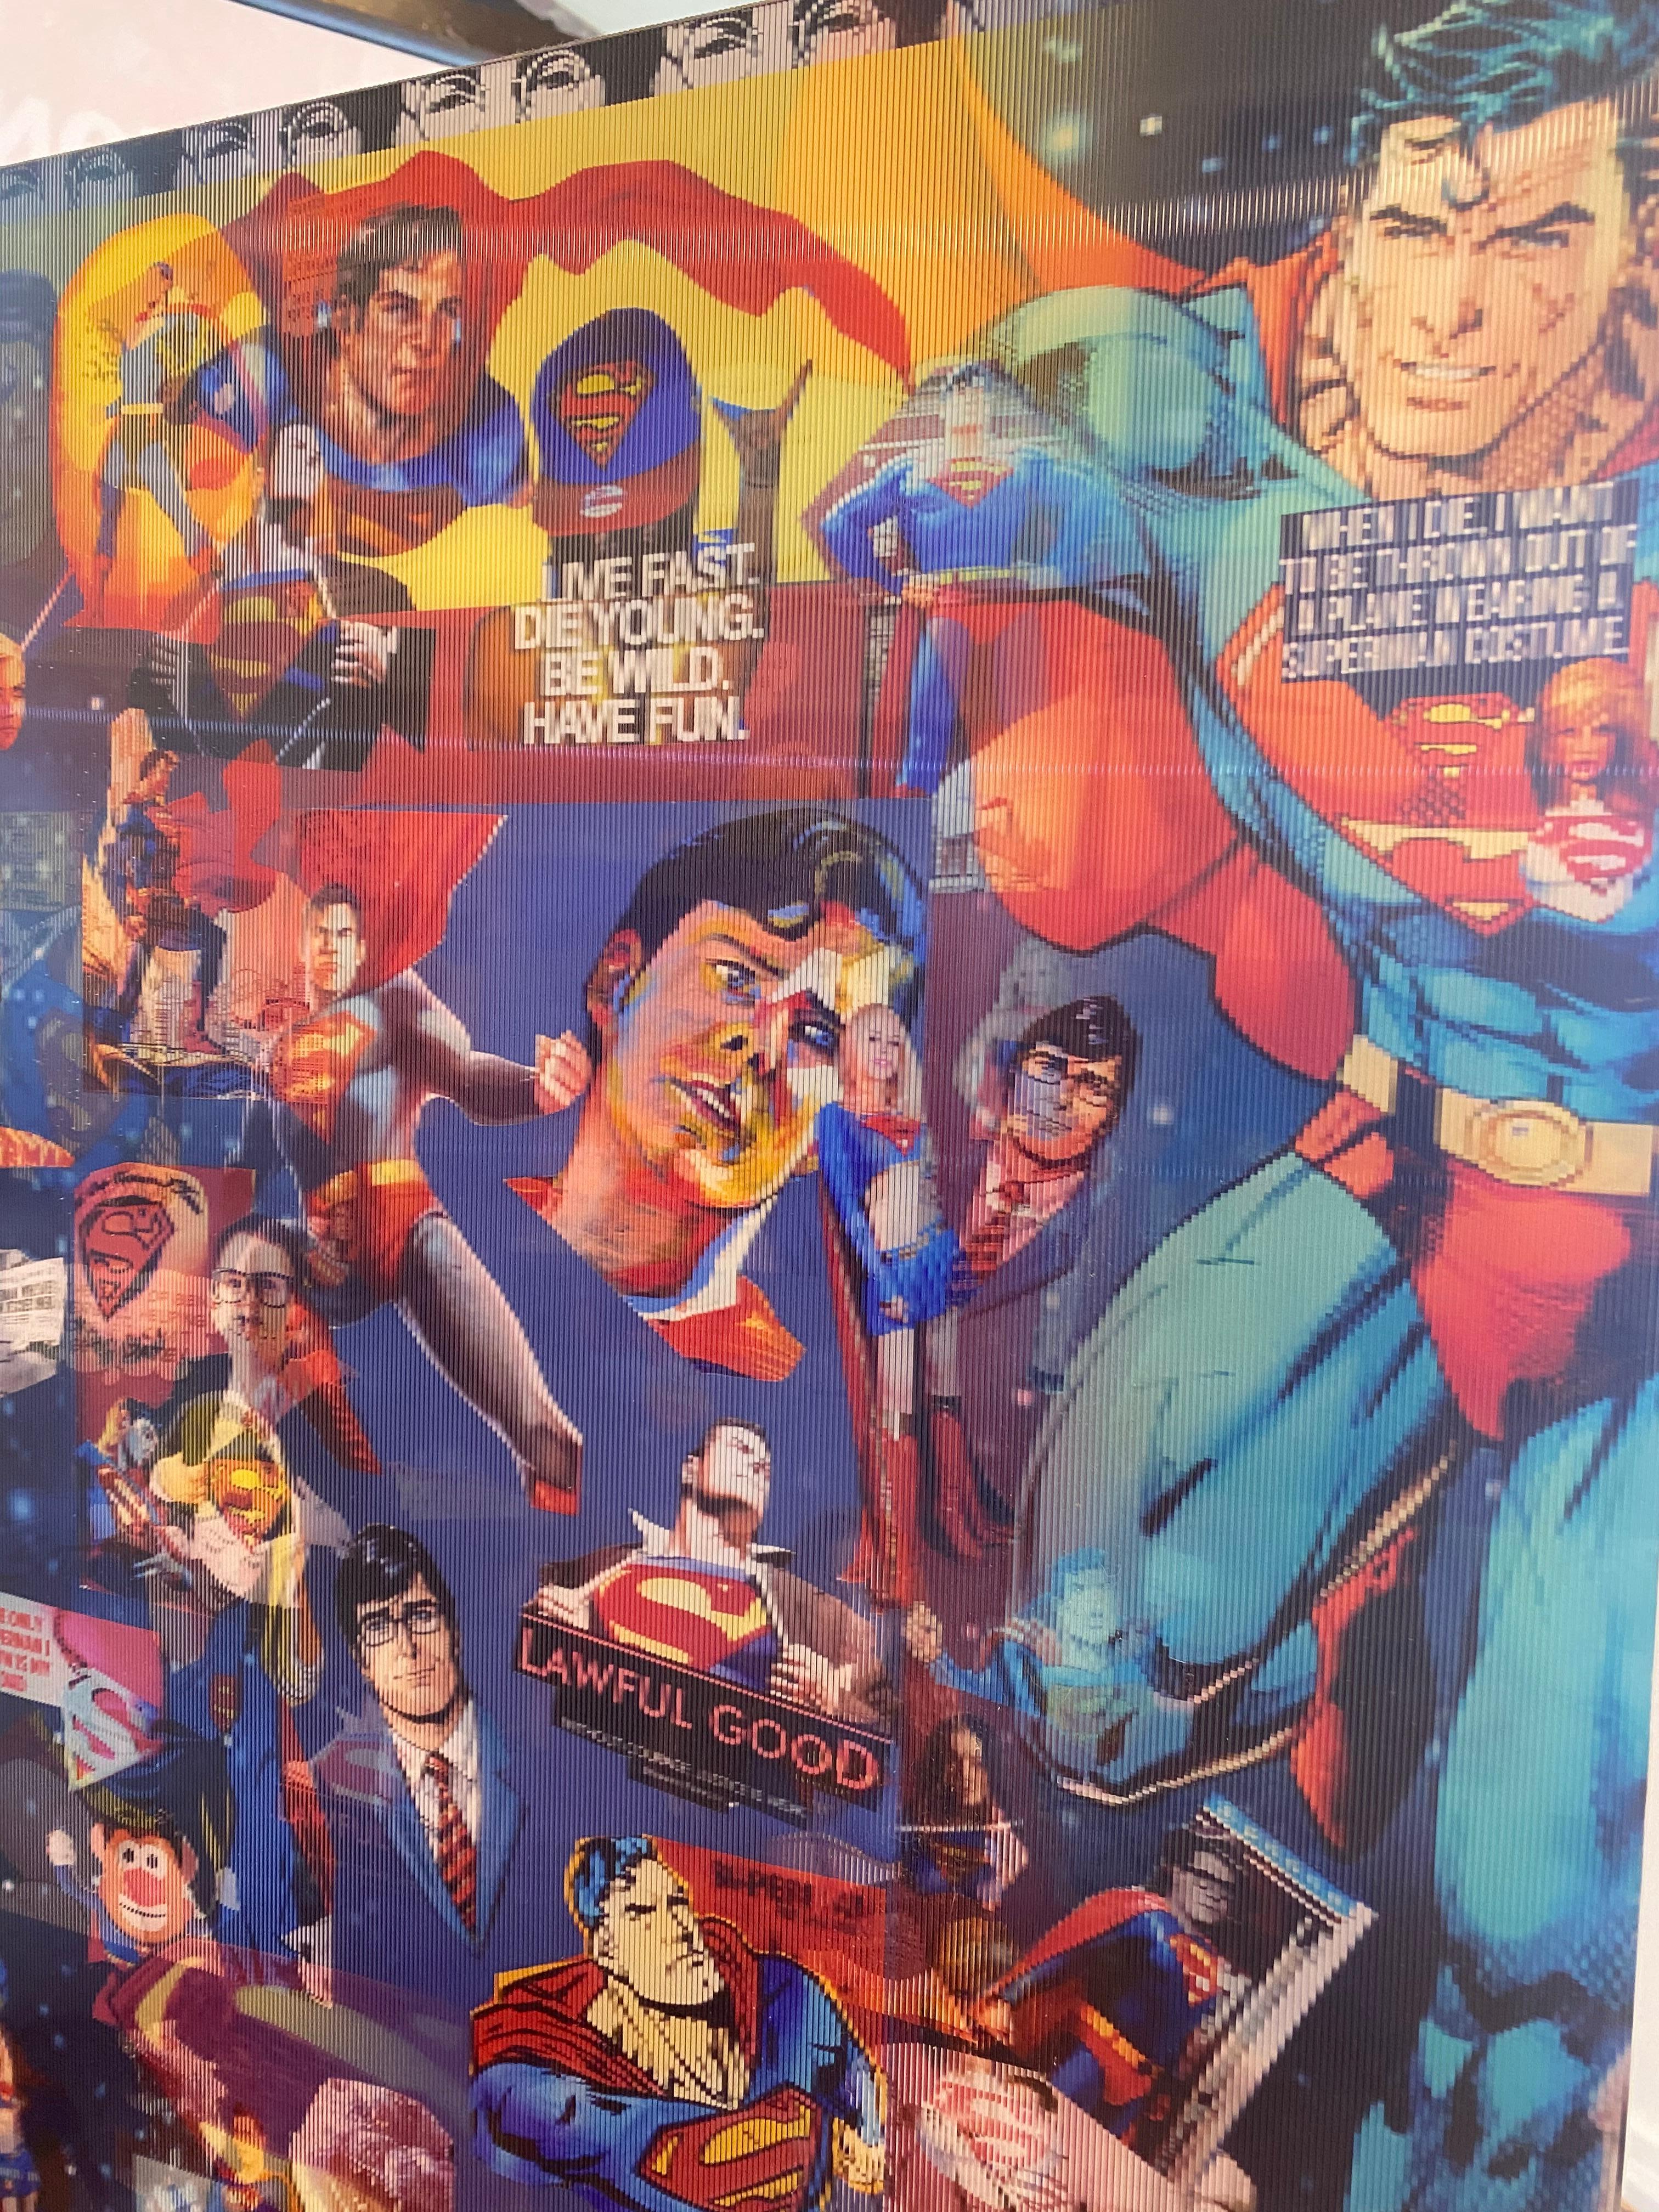 'Superman: Truth, Justice, and the American Way' by DJ Leon, 2013. The piece measures 32 x 40 inches. This Lenticular print incorporates, appropriates, and combines images and text featuring Superman. Lenticular images move as the spectator shifts